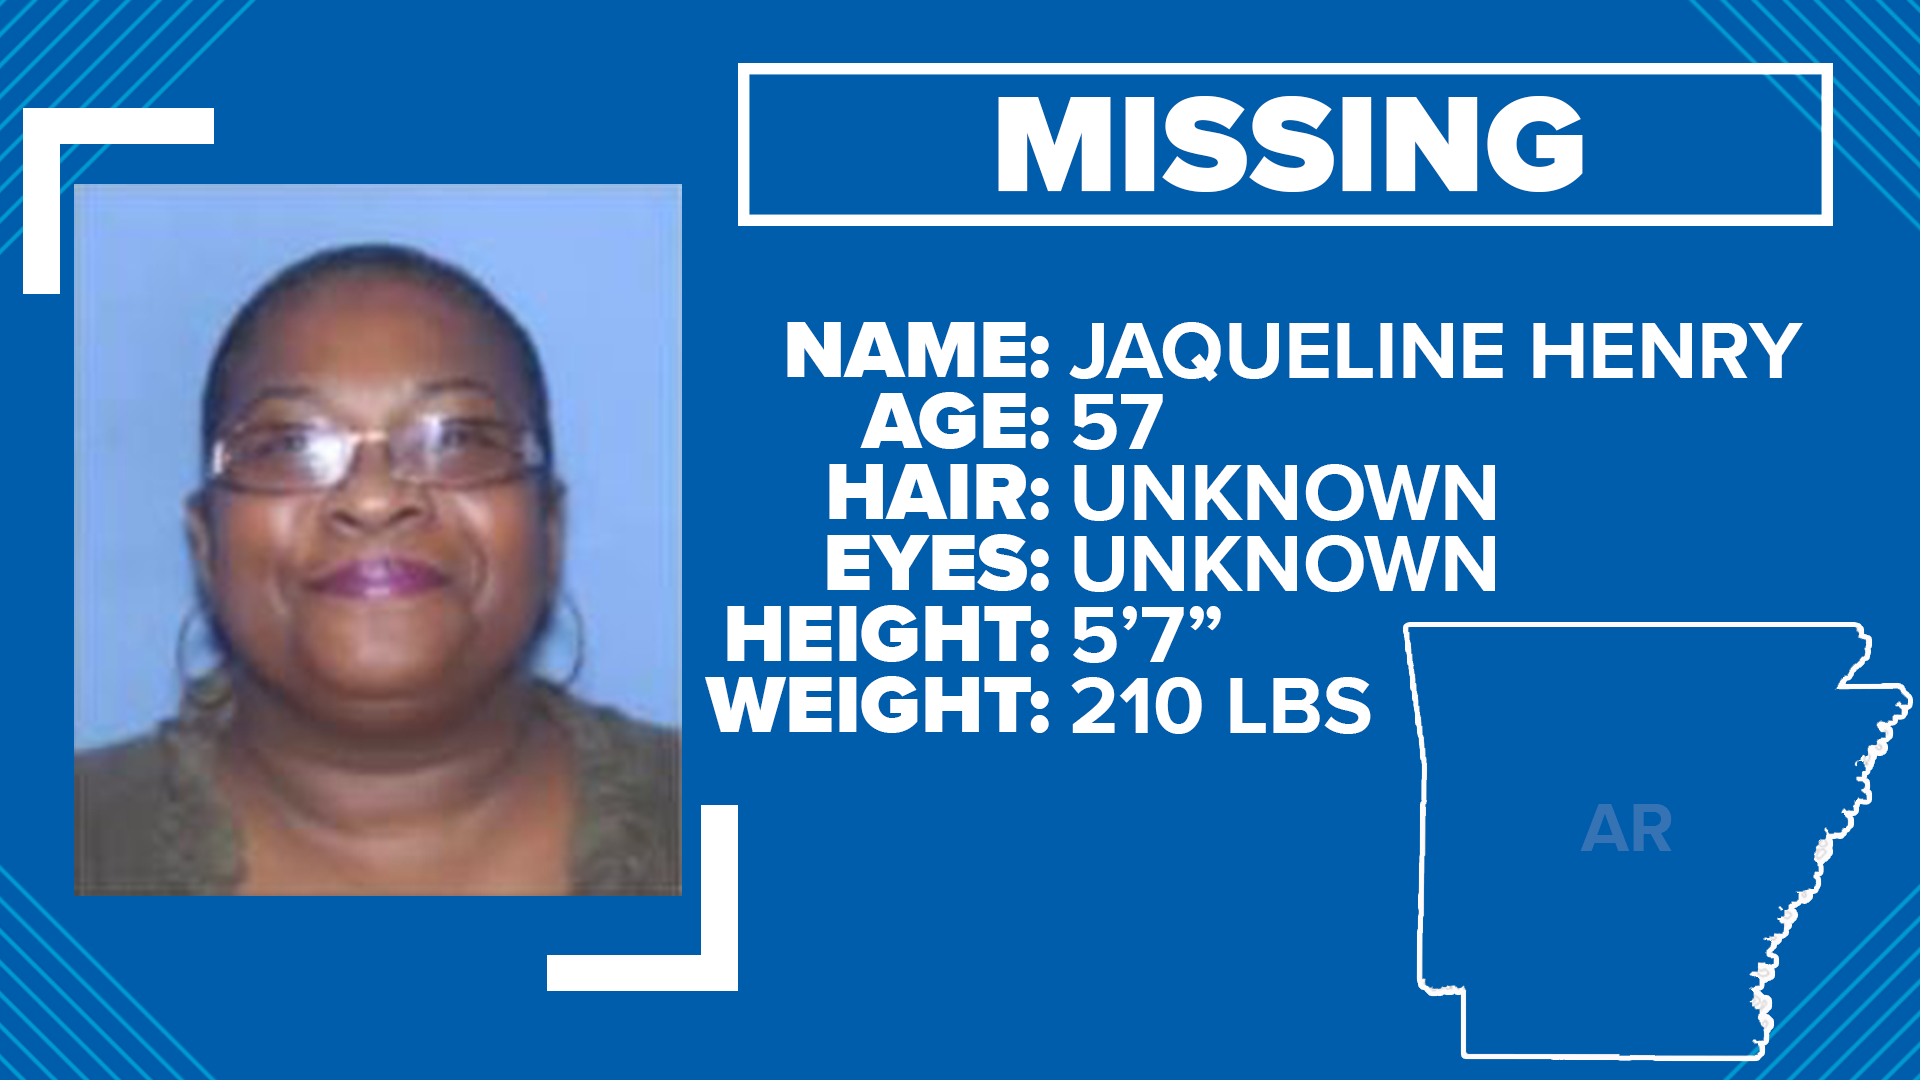 Little Rock police need help locating missing 57-year-old homeless woman